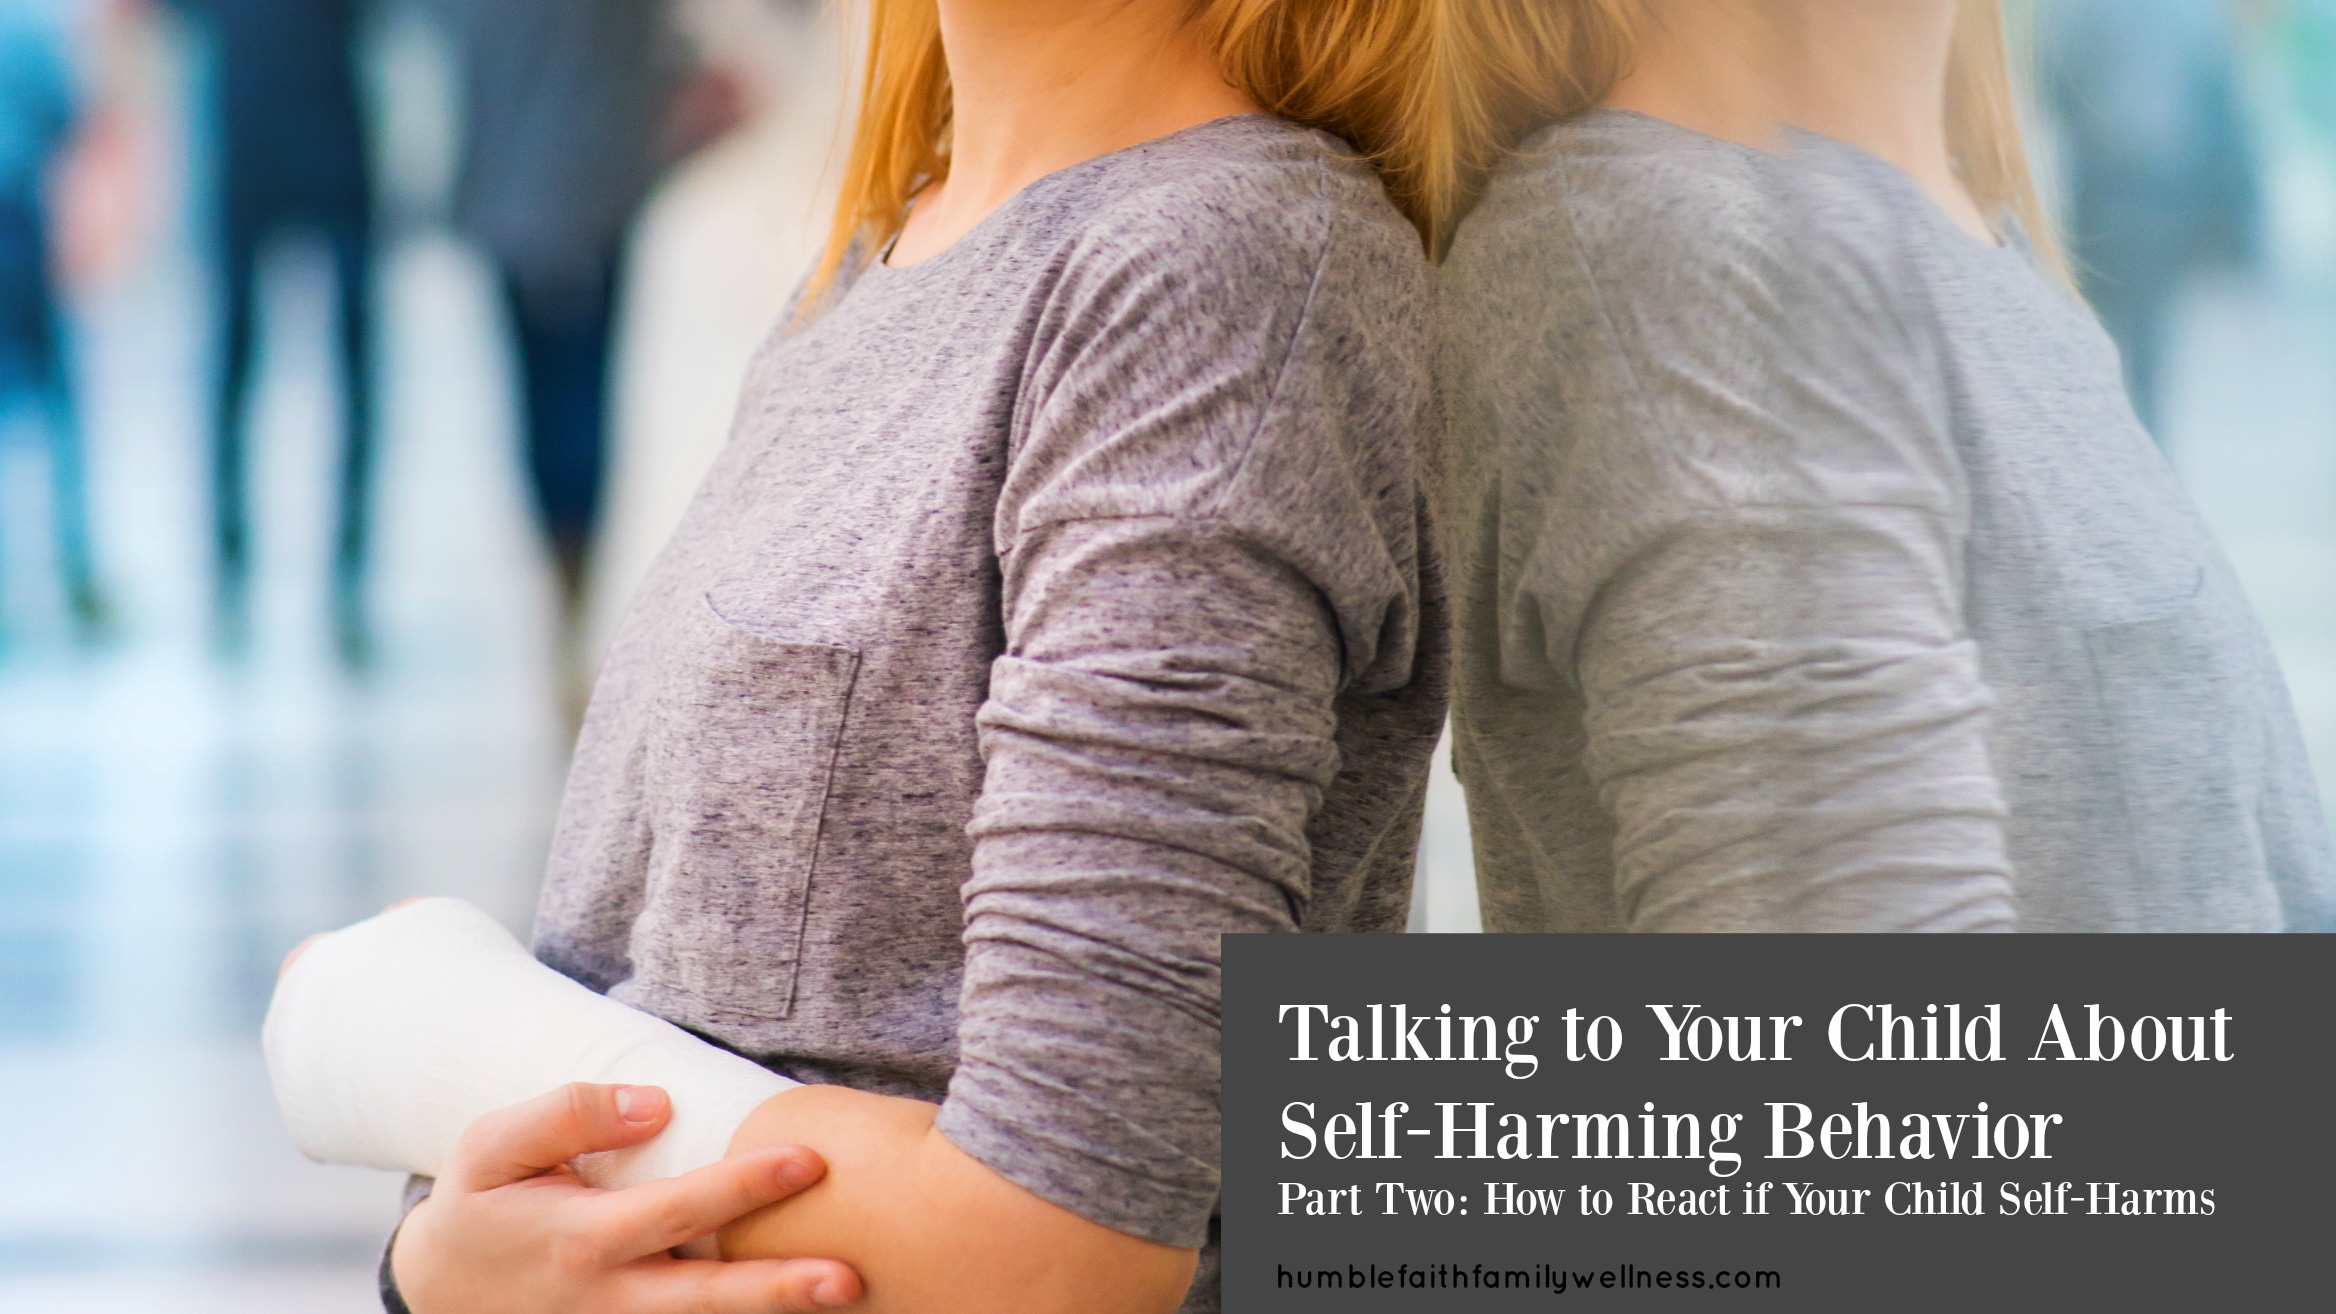 Featured self-harming behavior part two